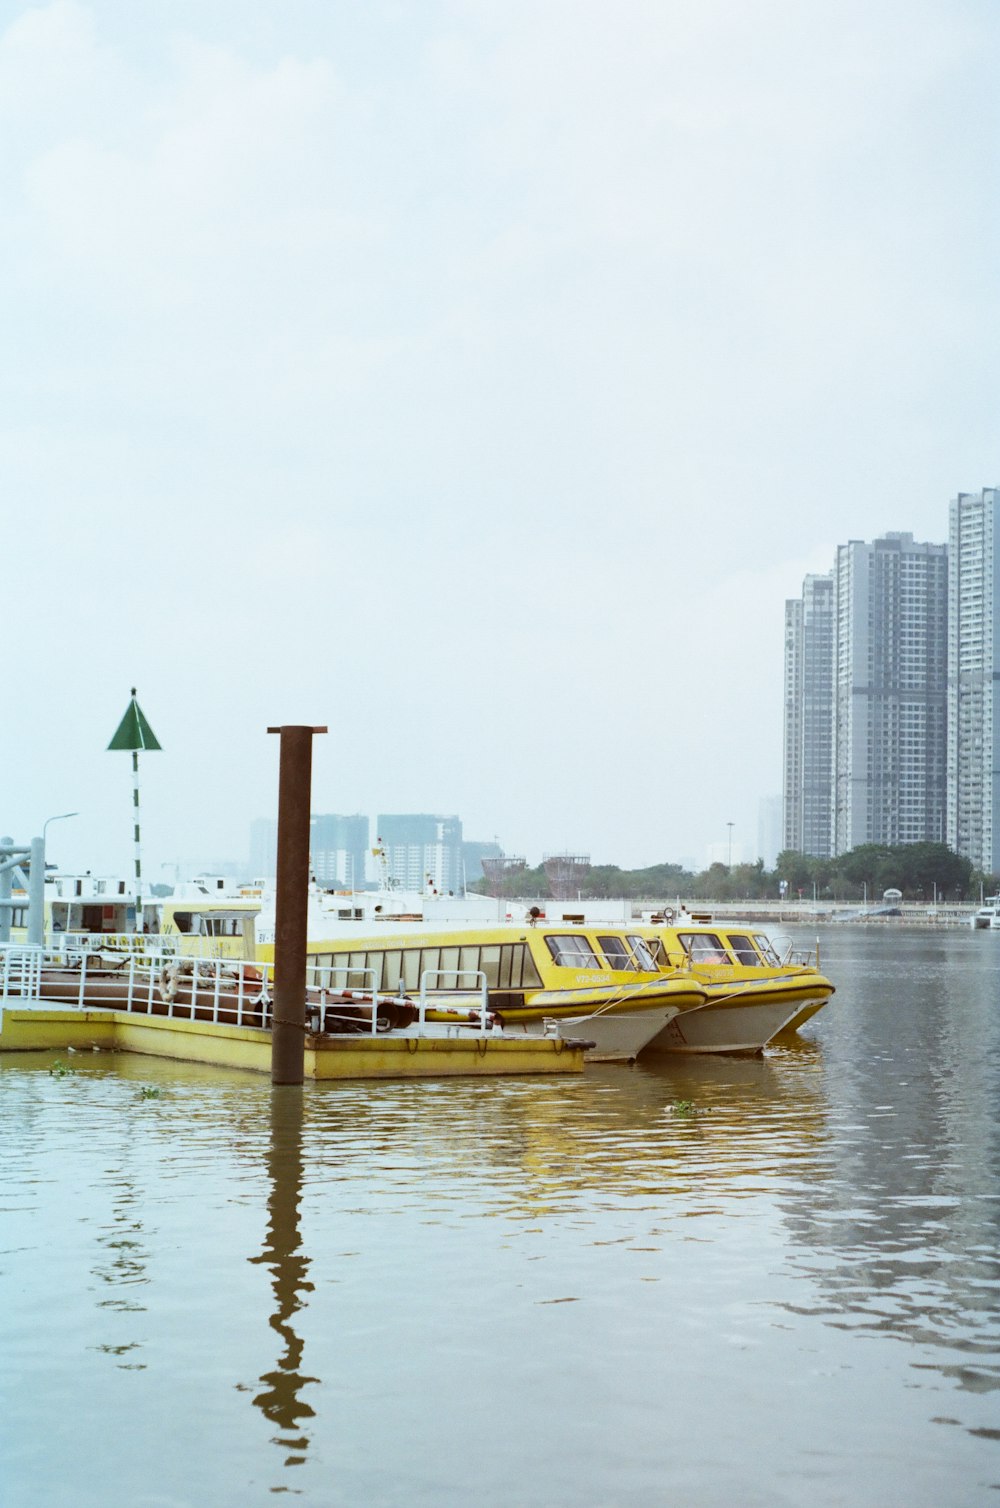 a yellow and white boat in a body of water